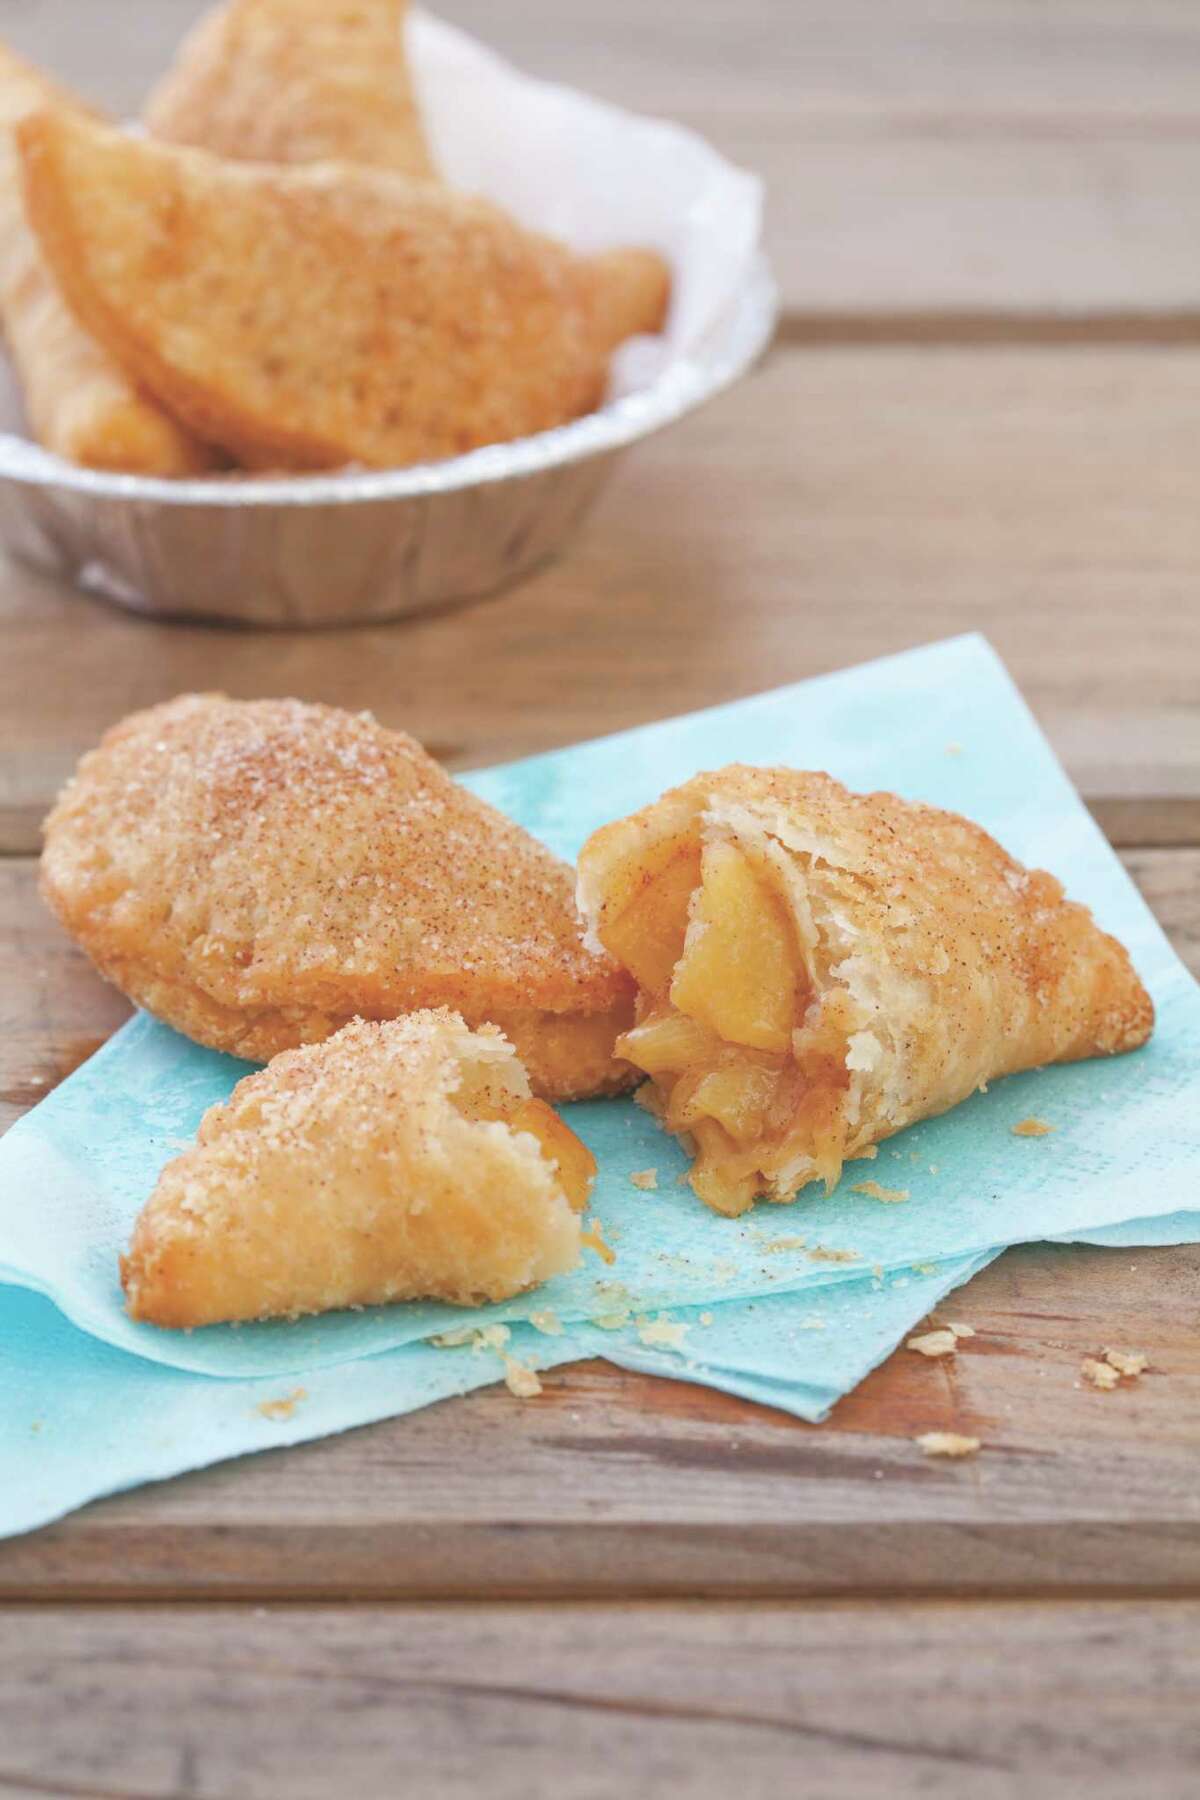 Biggum's Fried Pies, a recipe from "From Our Grandmother's Kitchens" by the editors of Cook's Country Magazine